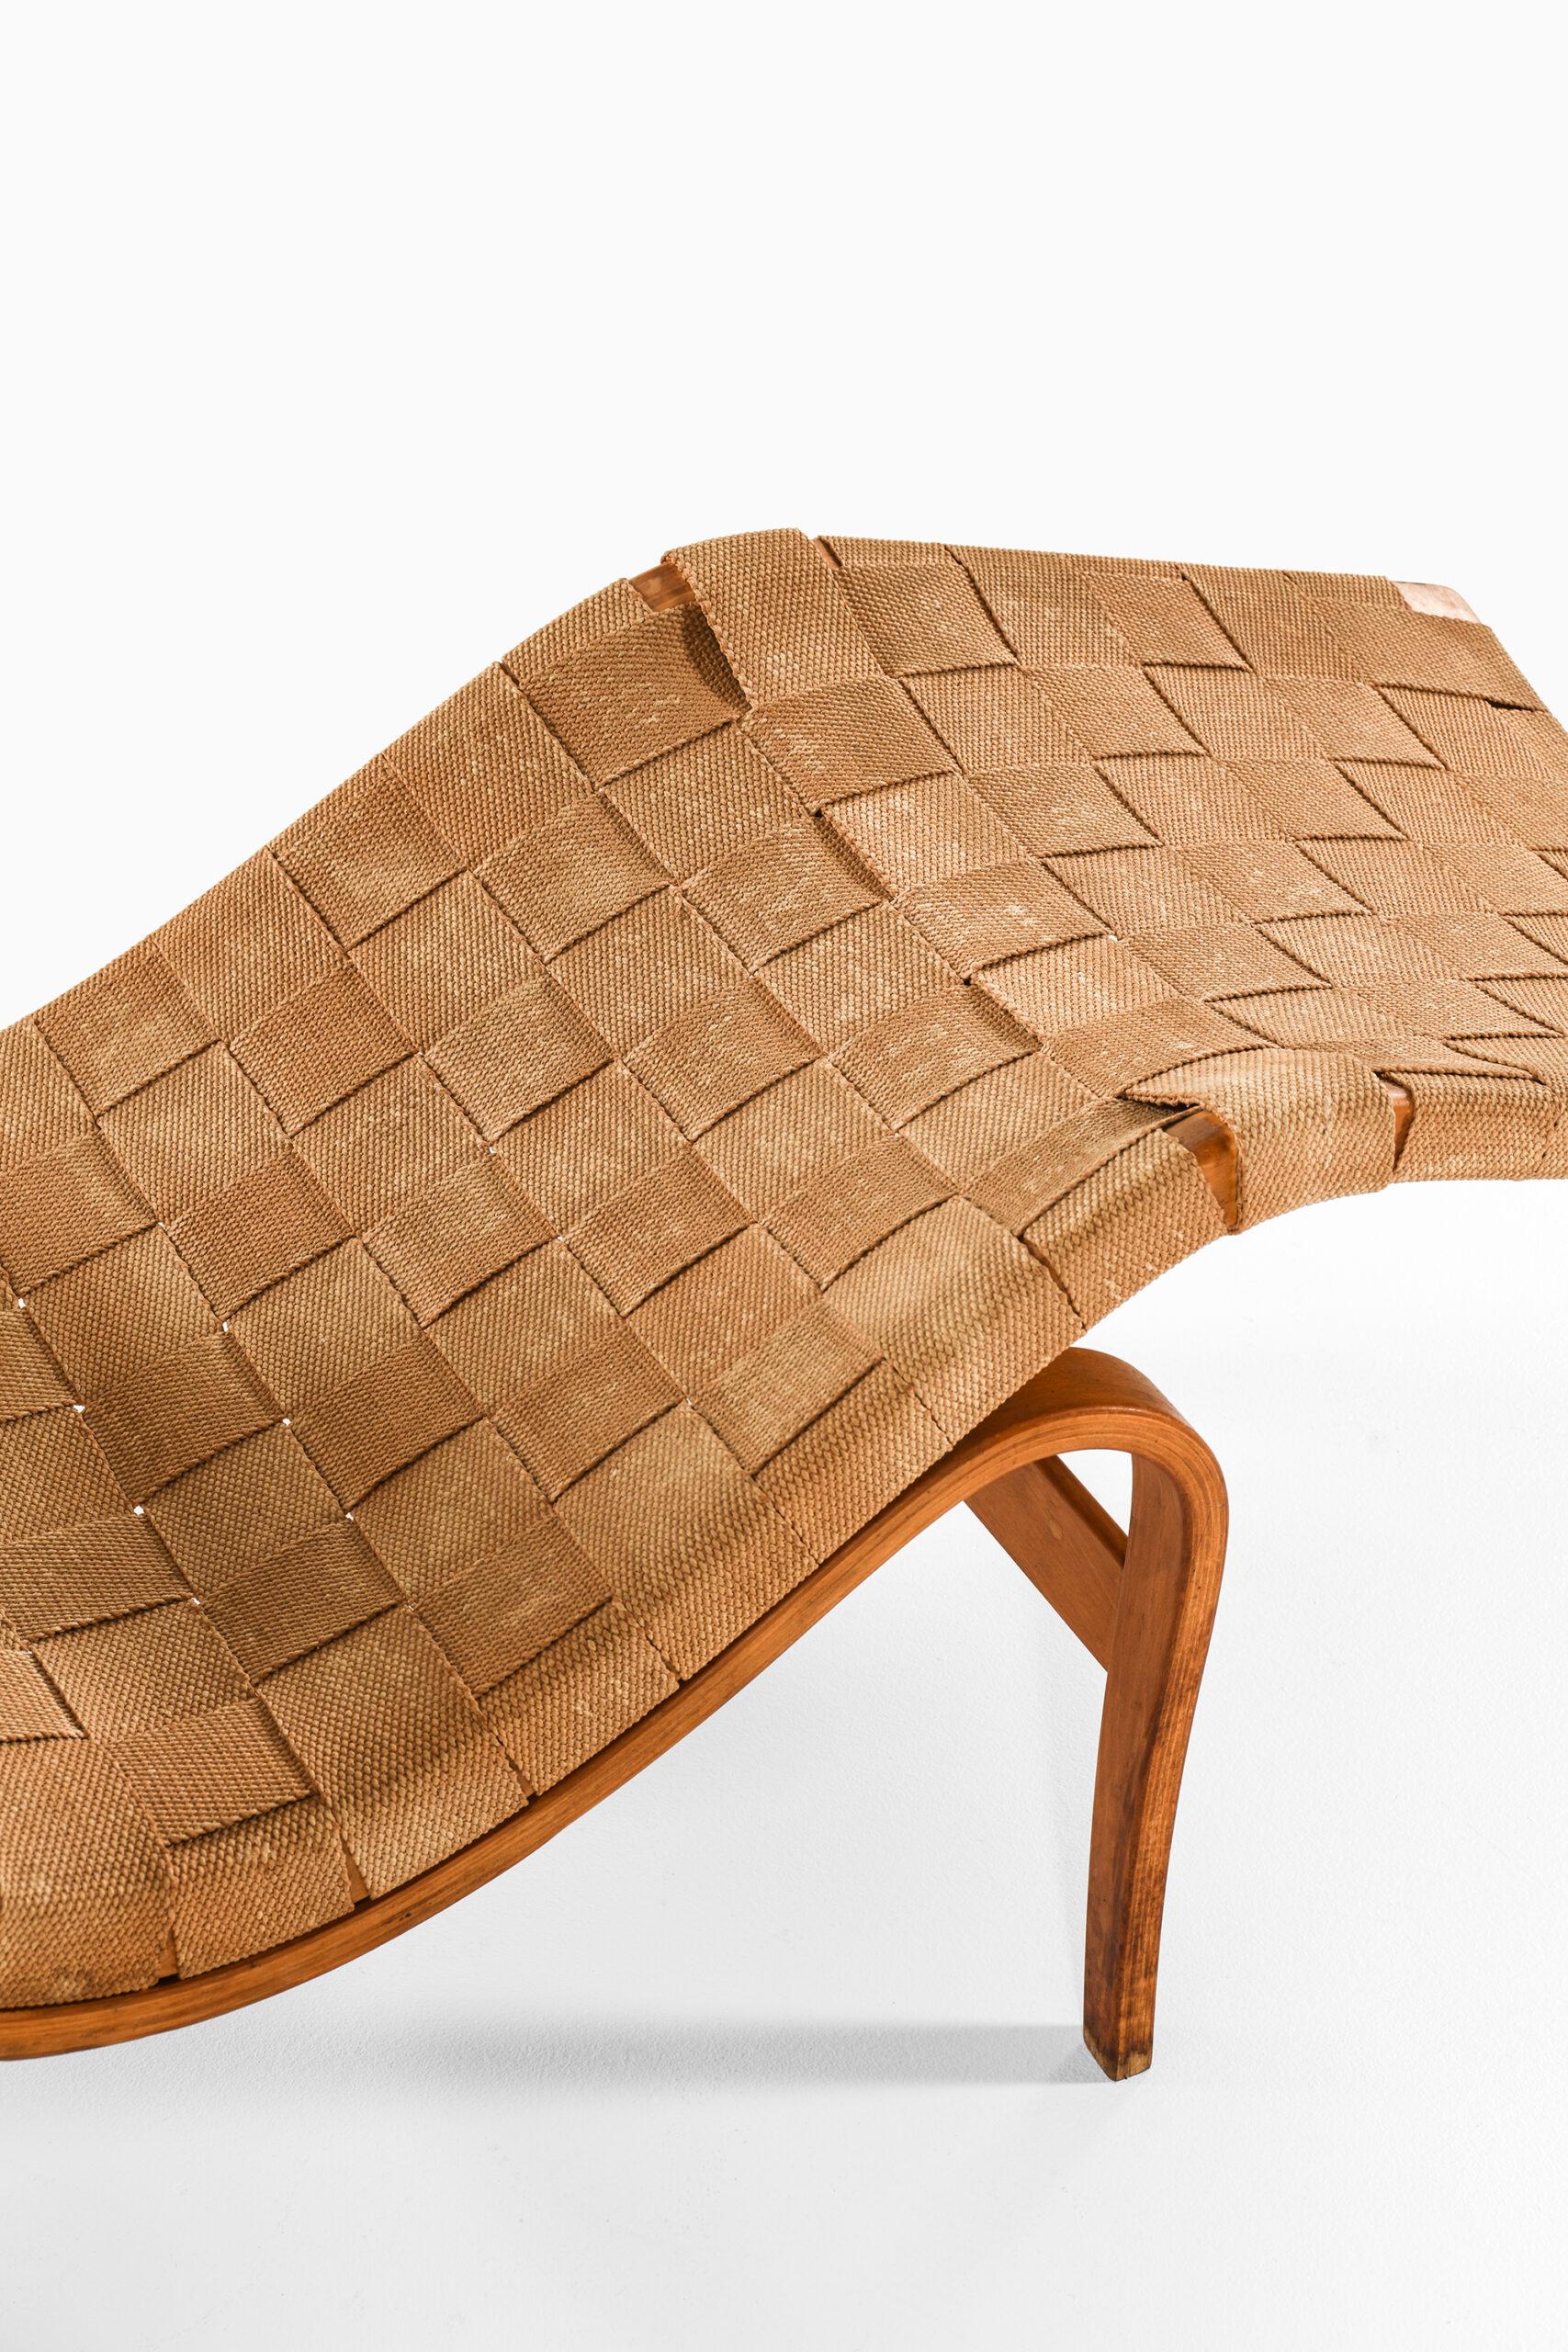 Rare early lounge chair model 36 designed by Bruno Mathsson. Produced by Karl Mathsson in Värnamo, Sweden.